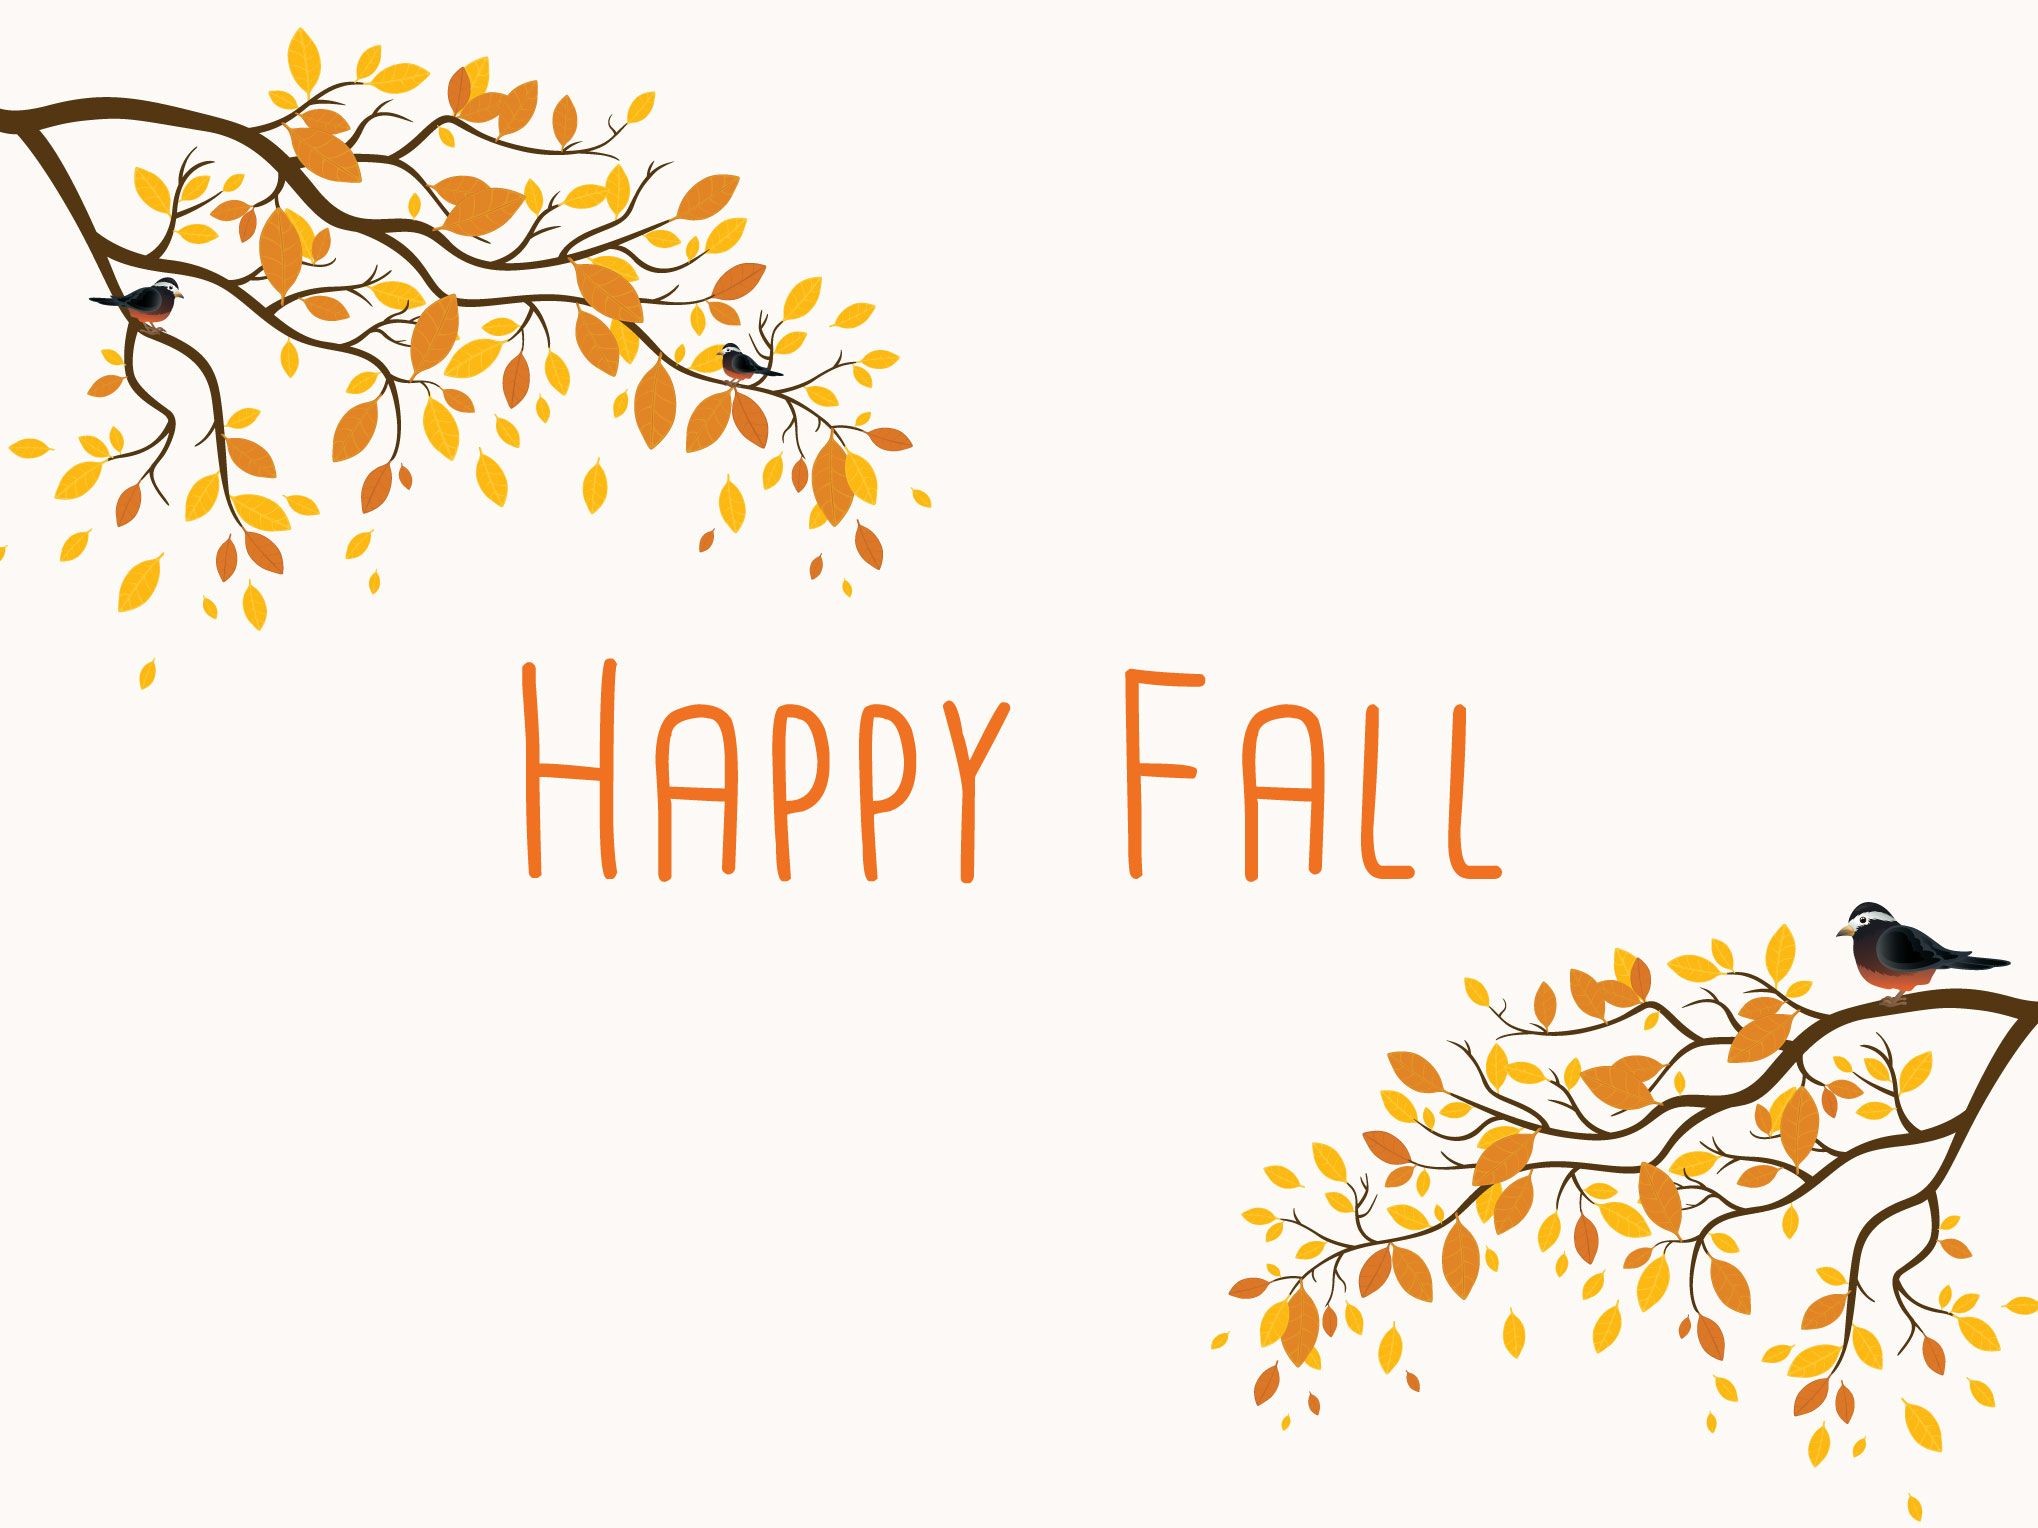 Add A Touch Of Autumn To Your Tech With Free Fall Desktop Fall Wallpaper Desktop